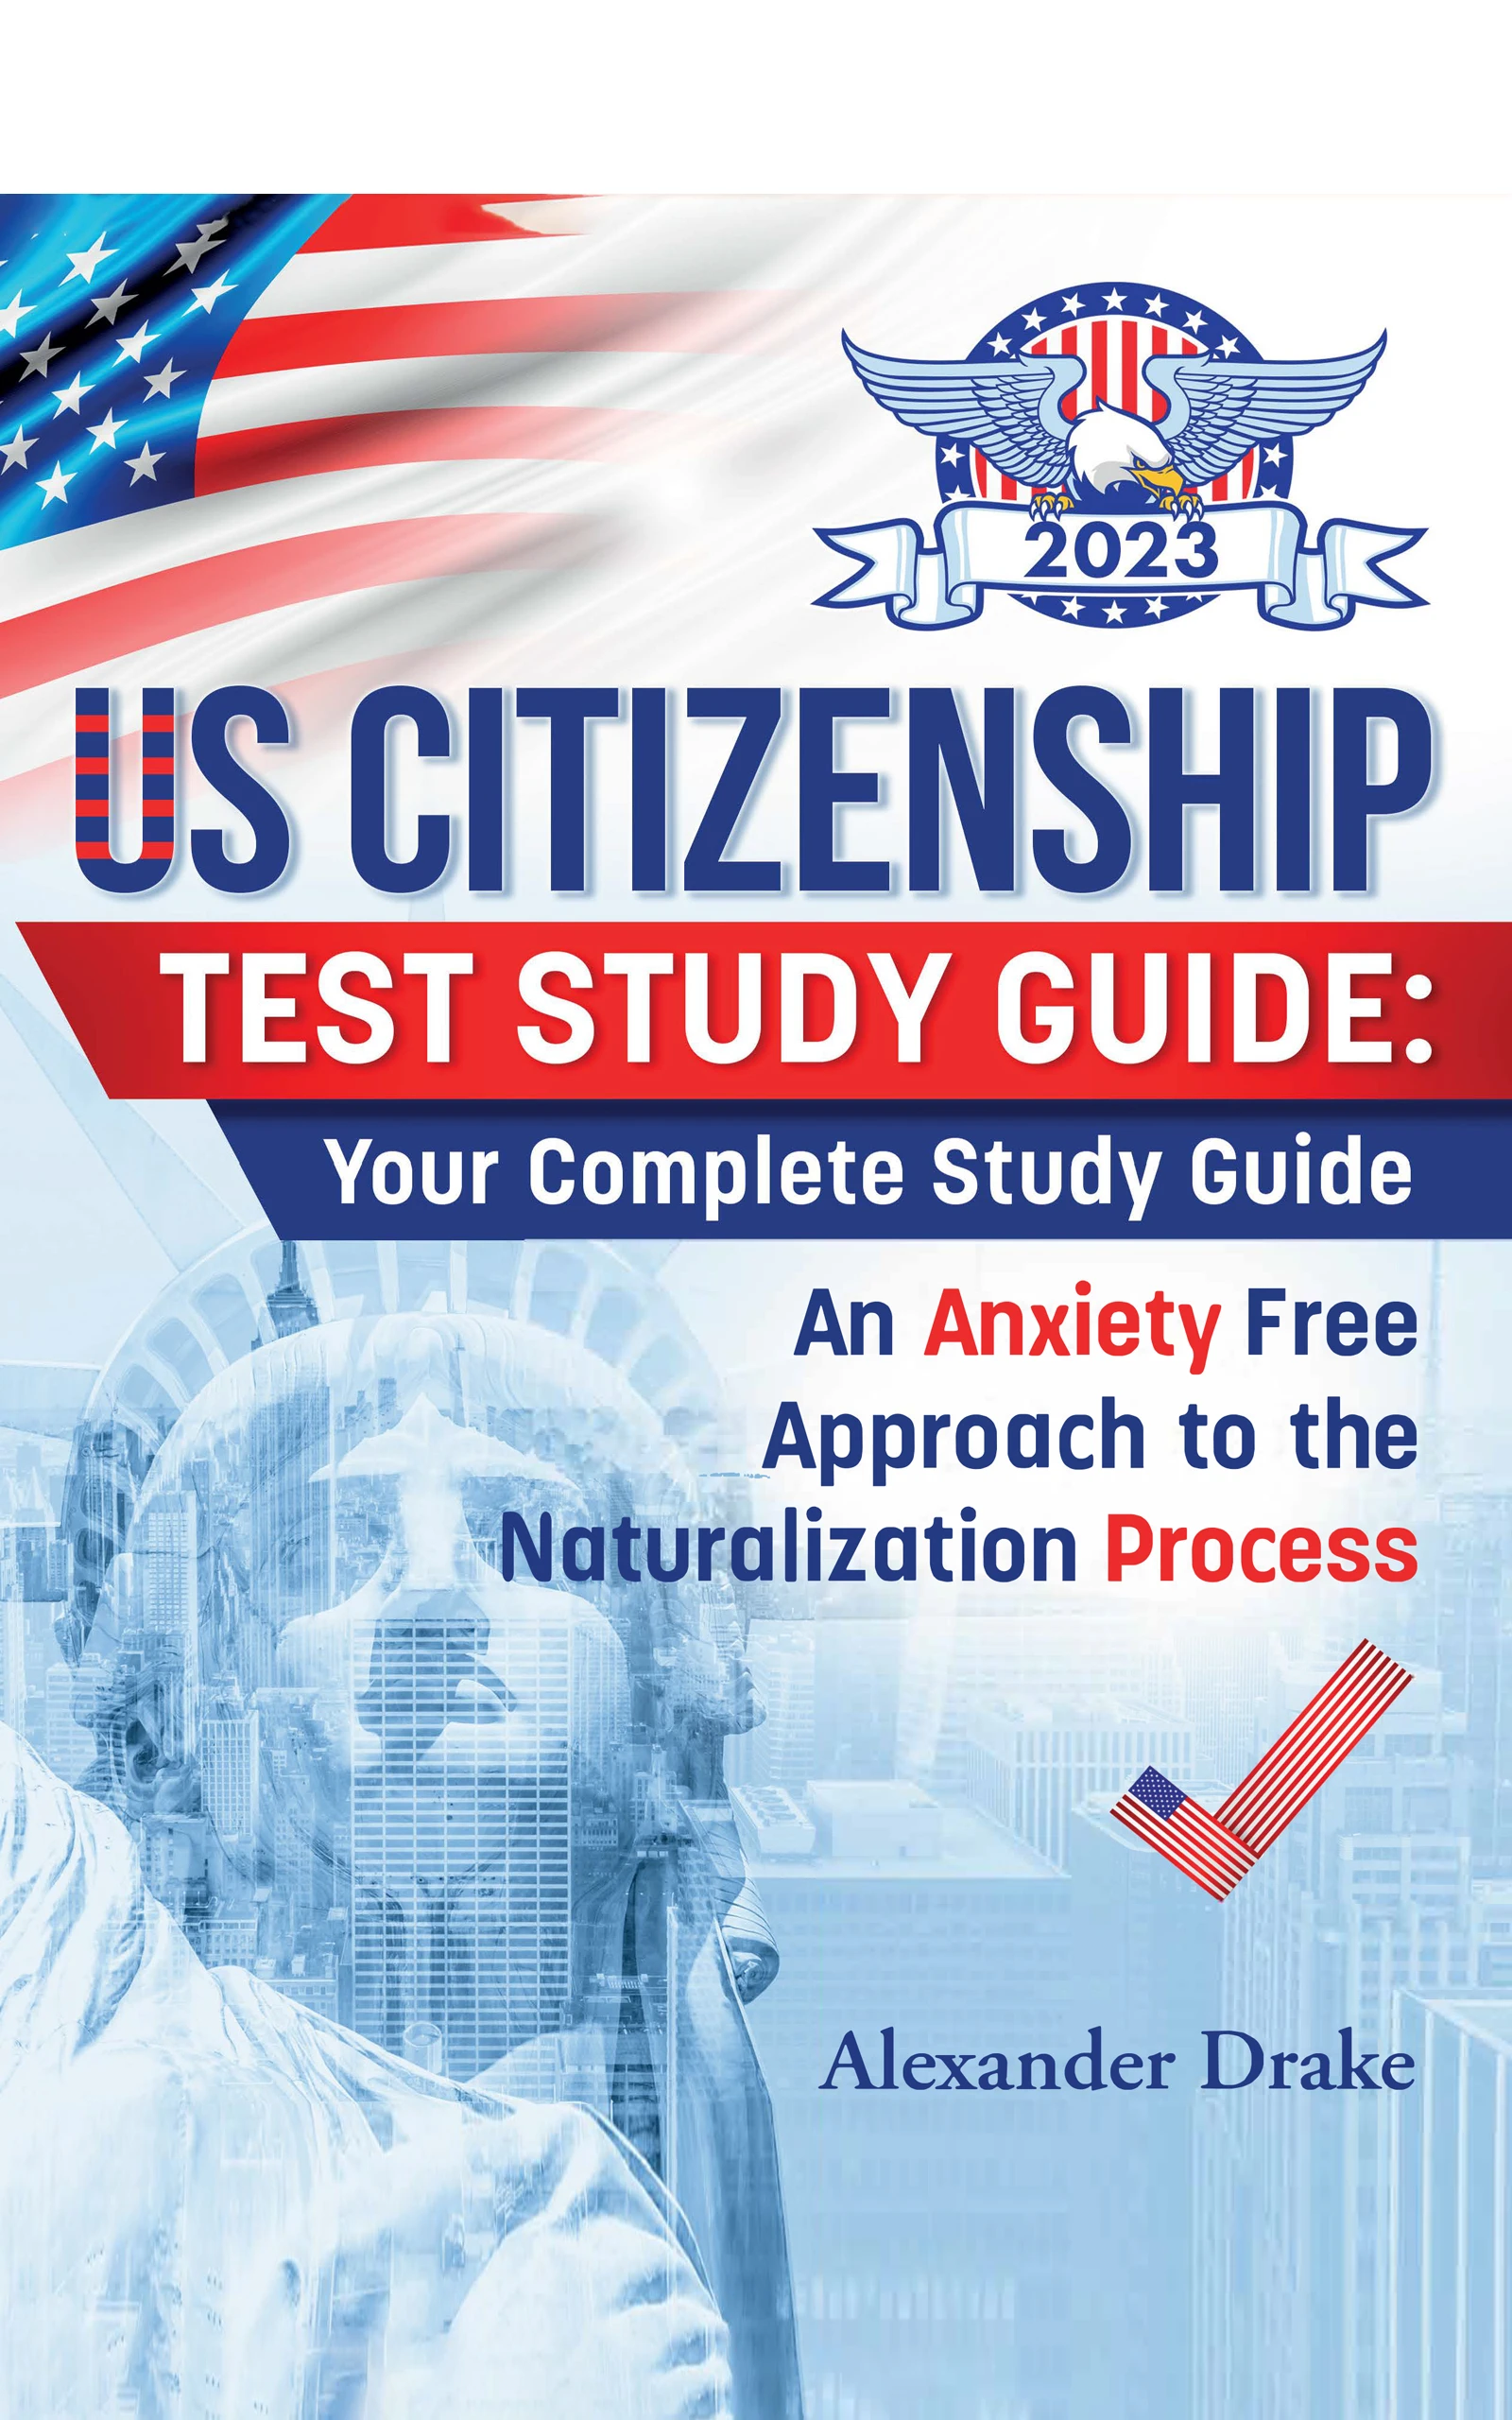 US Citizenship Test Study Guide: An Anxiety Free Approach to the Naturalization Process